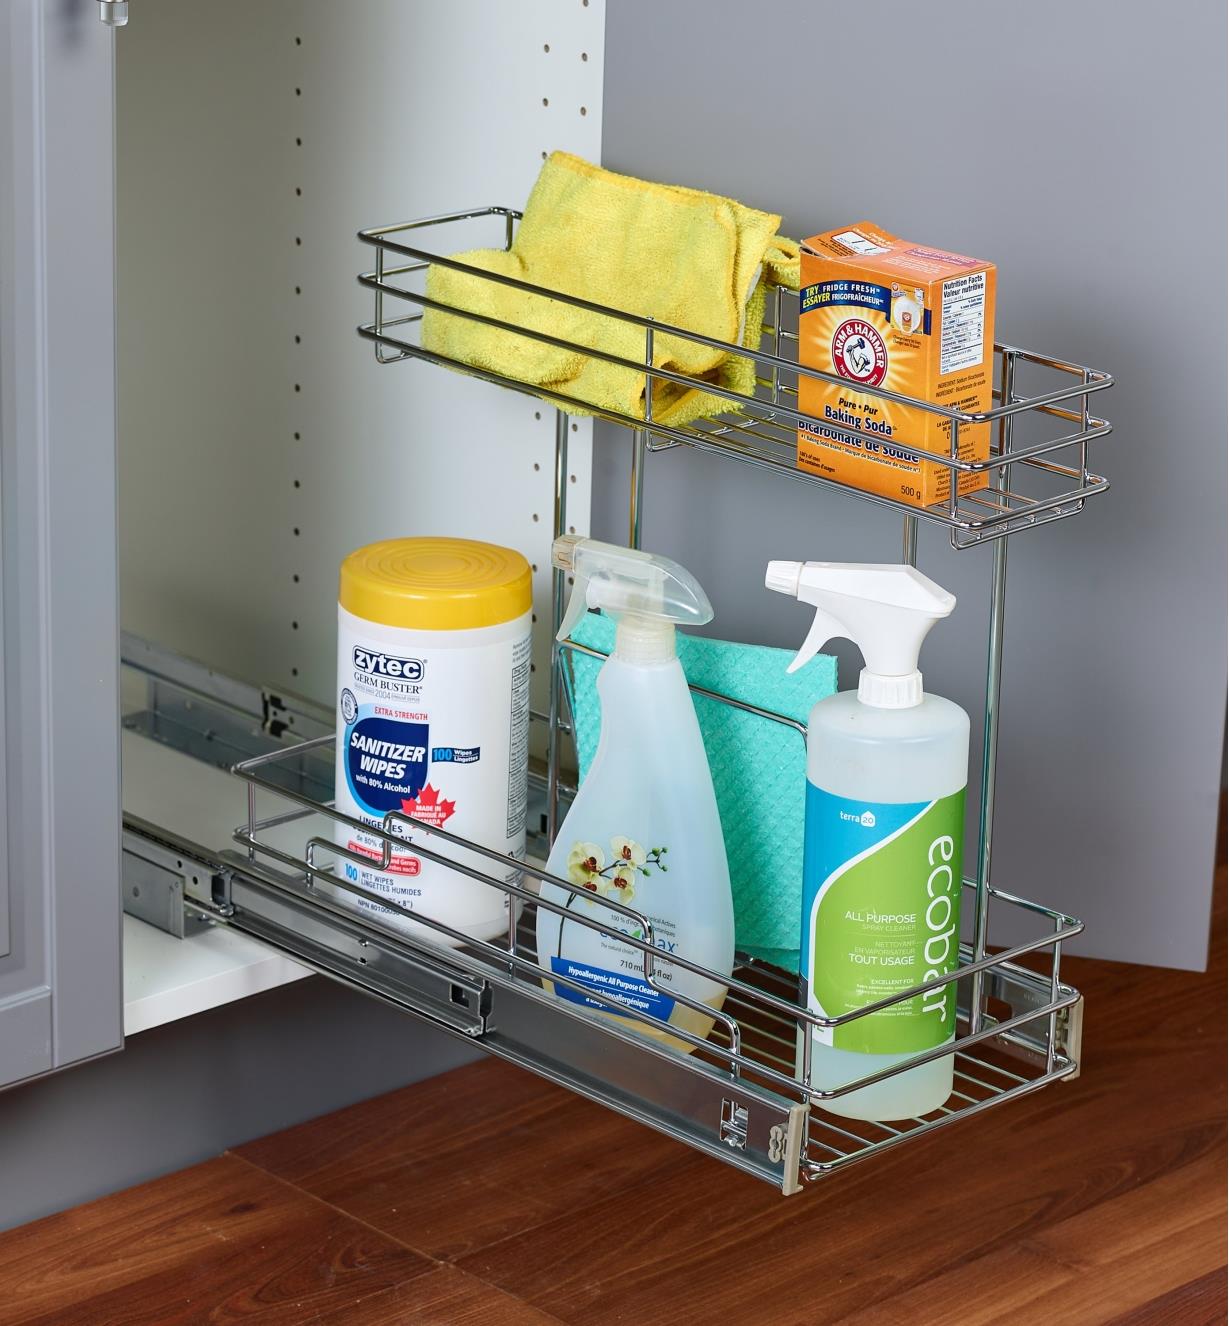 Under-sink unit holding cleaning supplies, installed in a kitchen cupboard